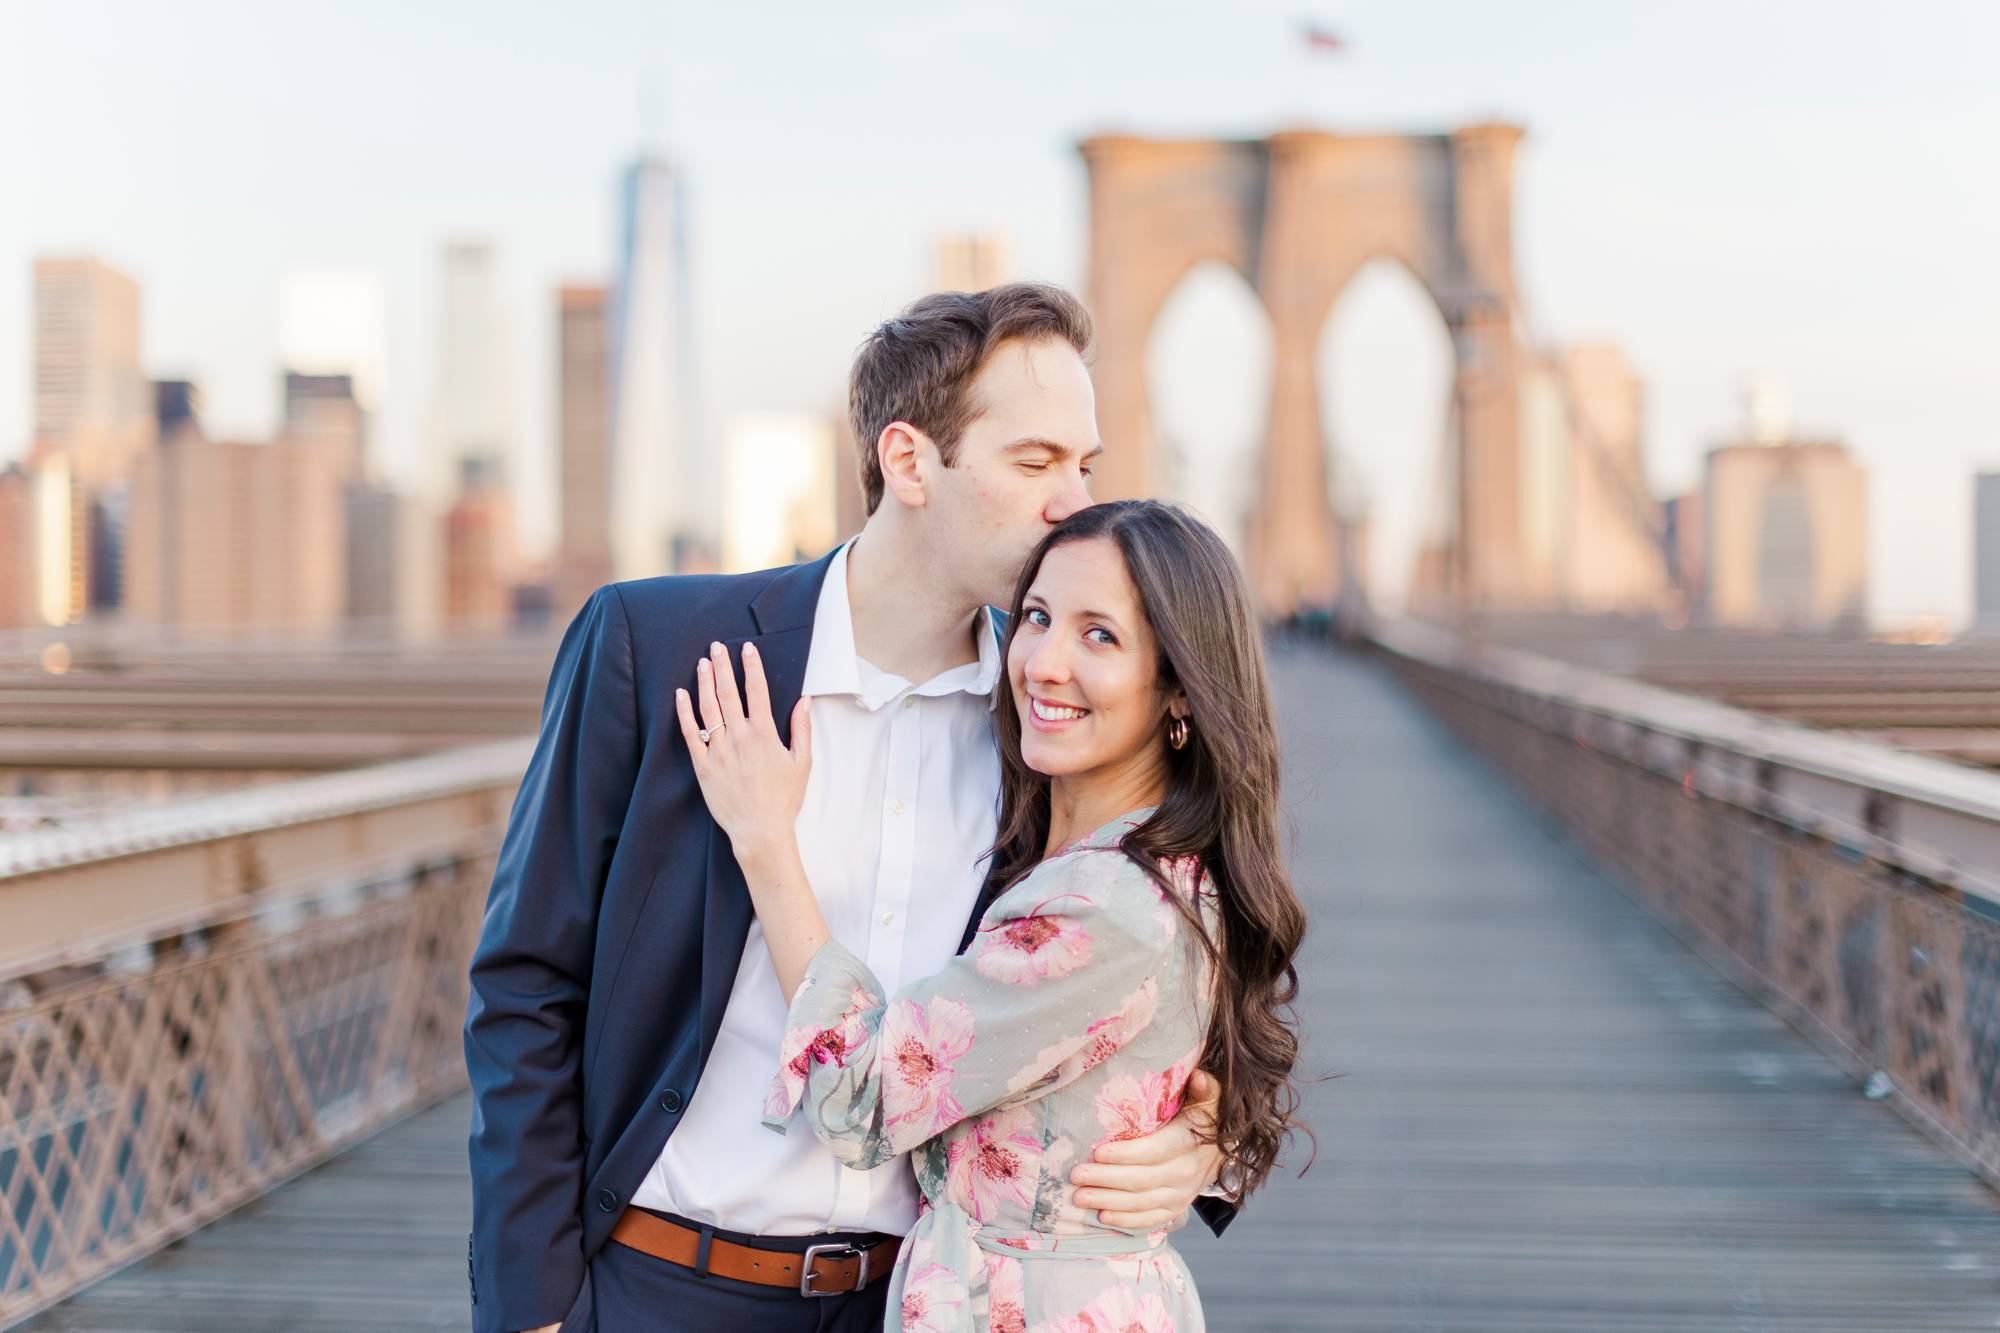 Playful Engagement Shoot in DUMBO